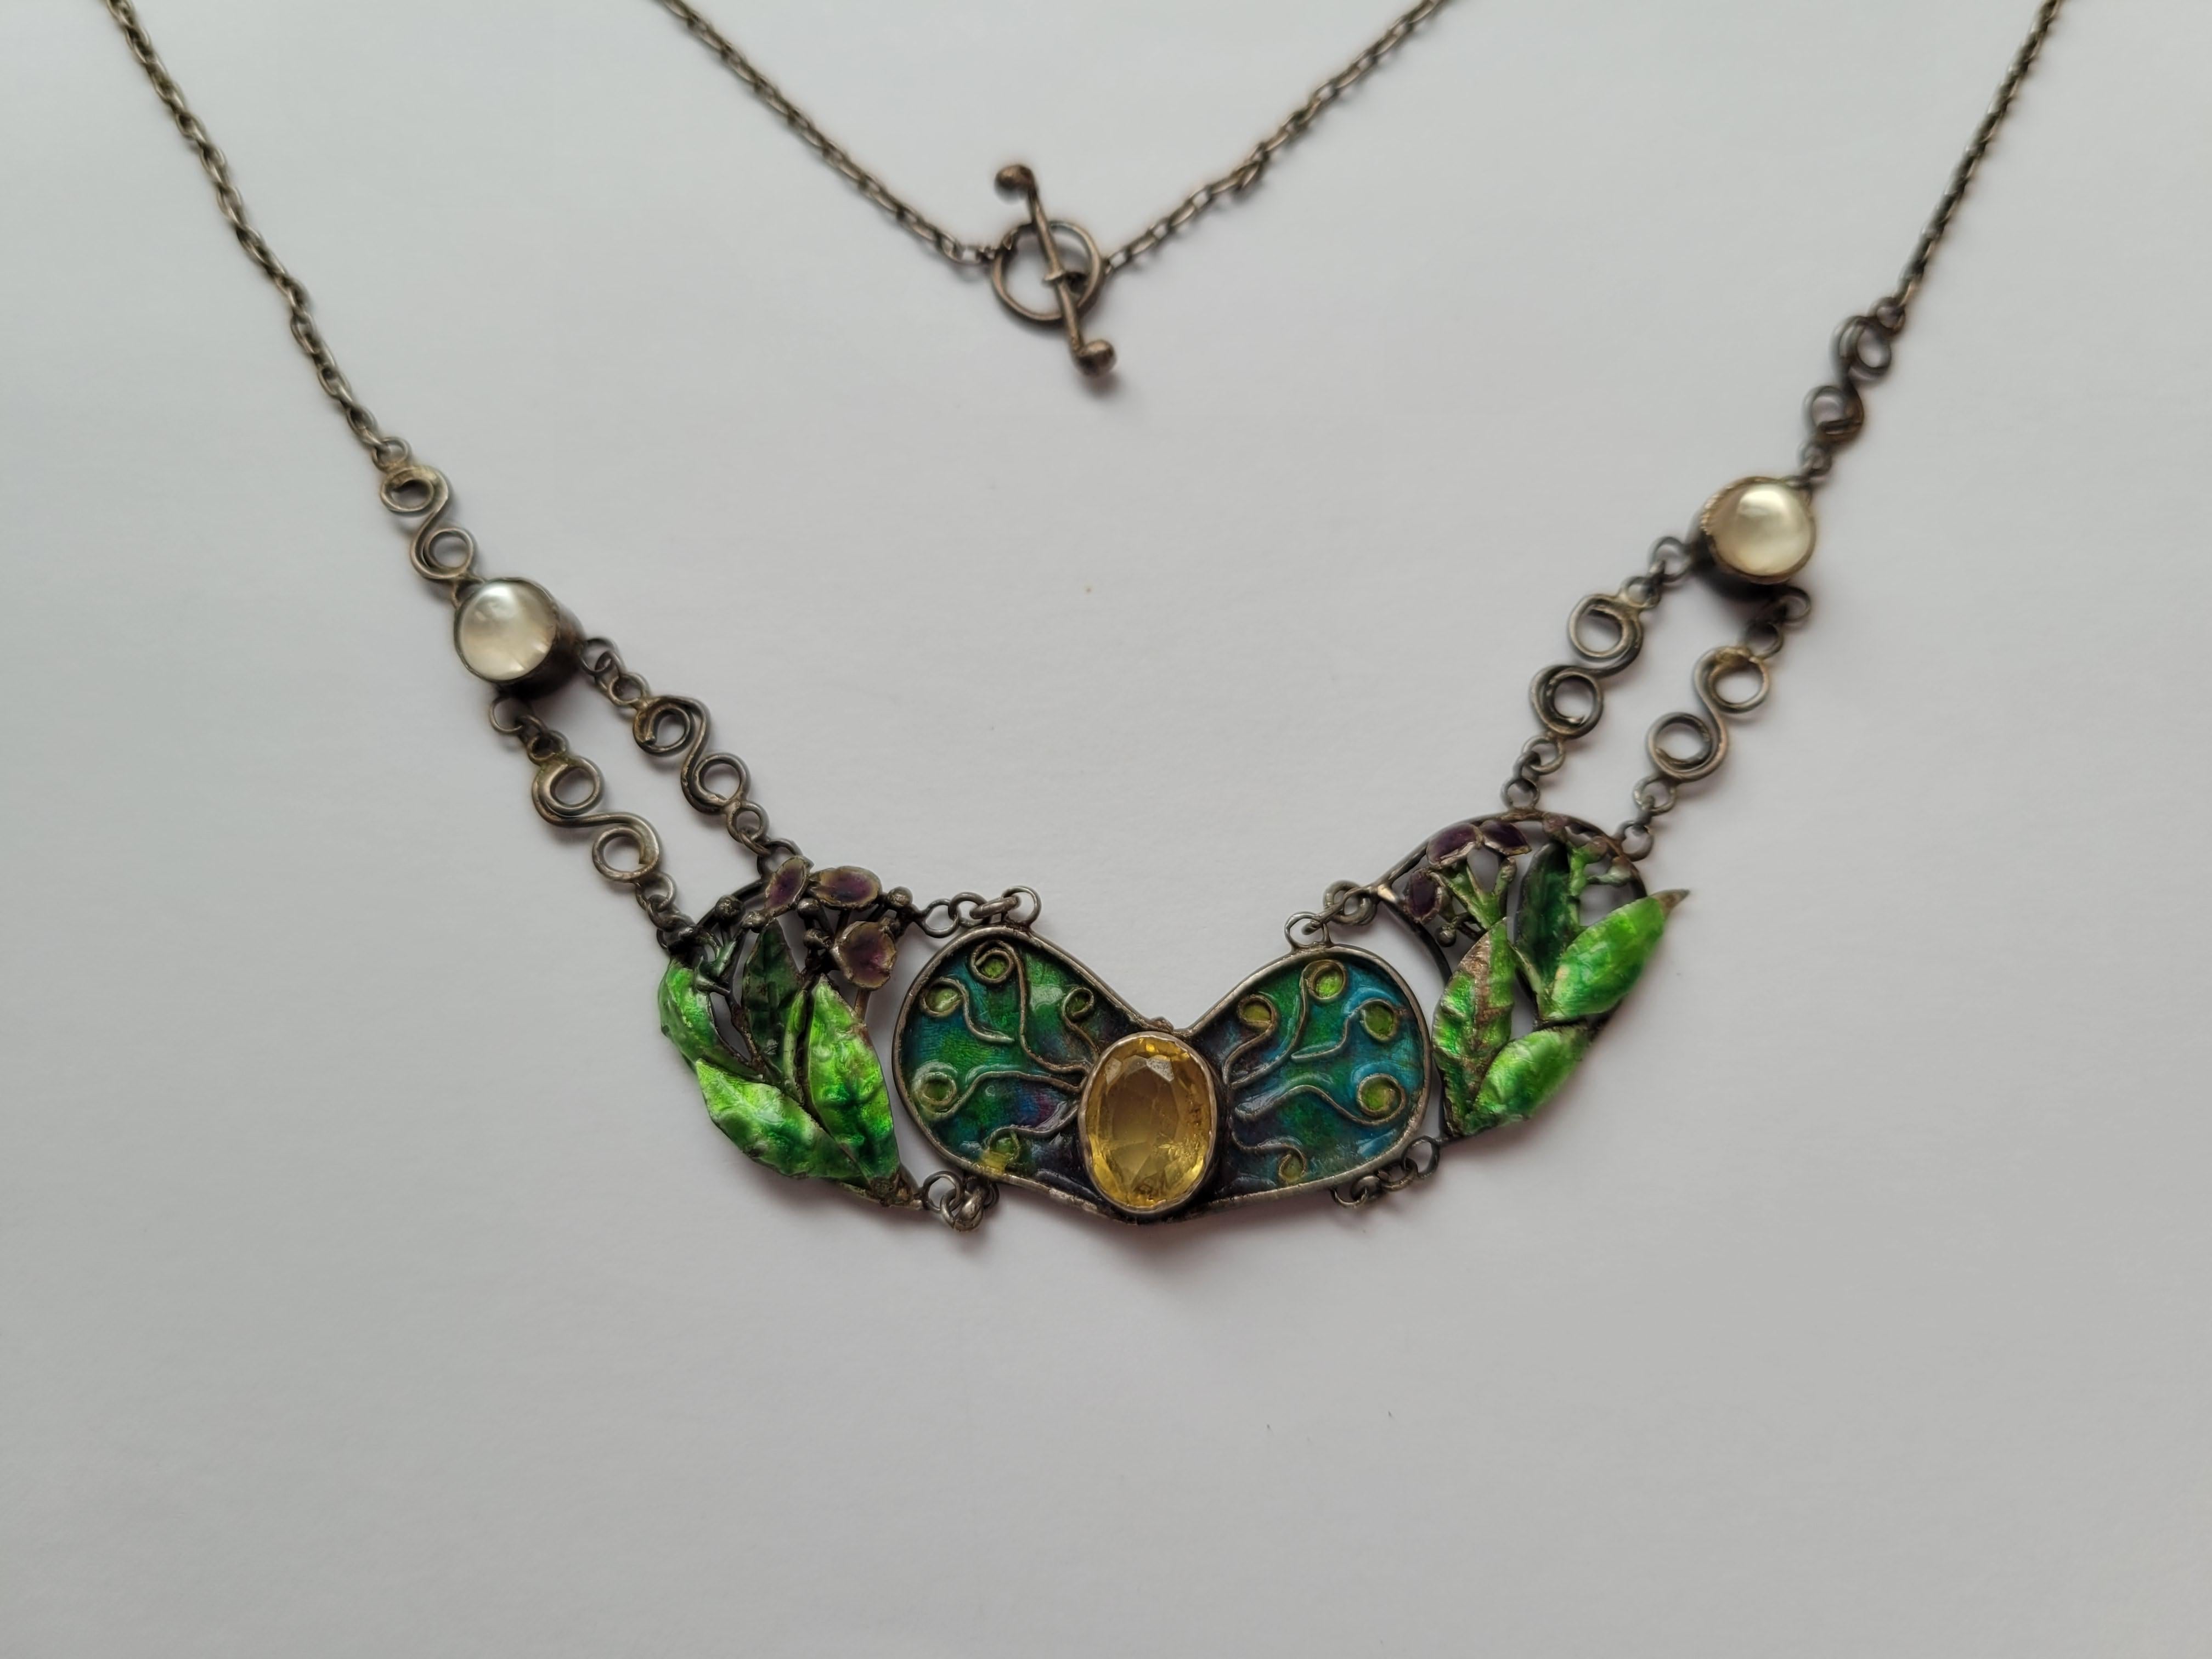 1900s necklace